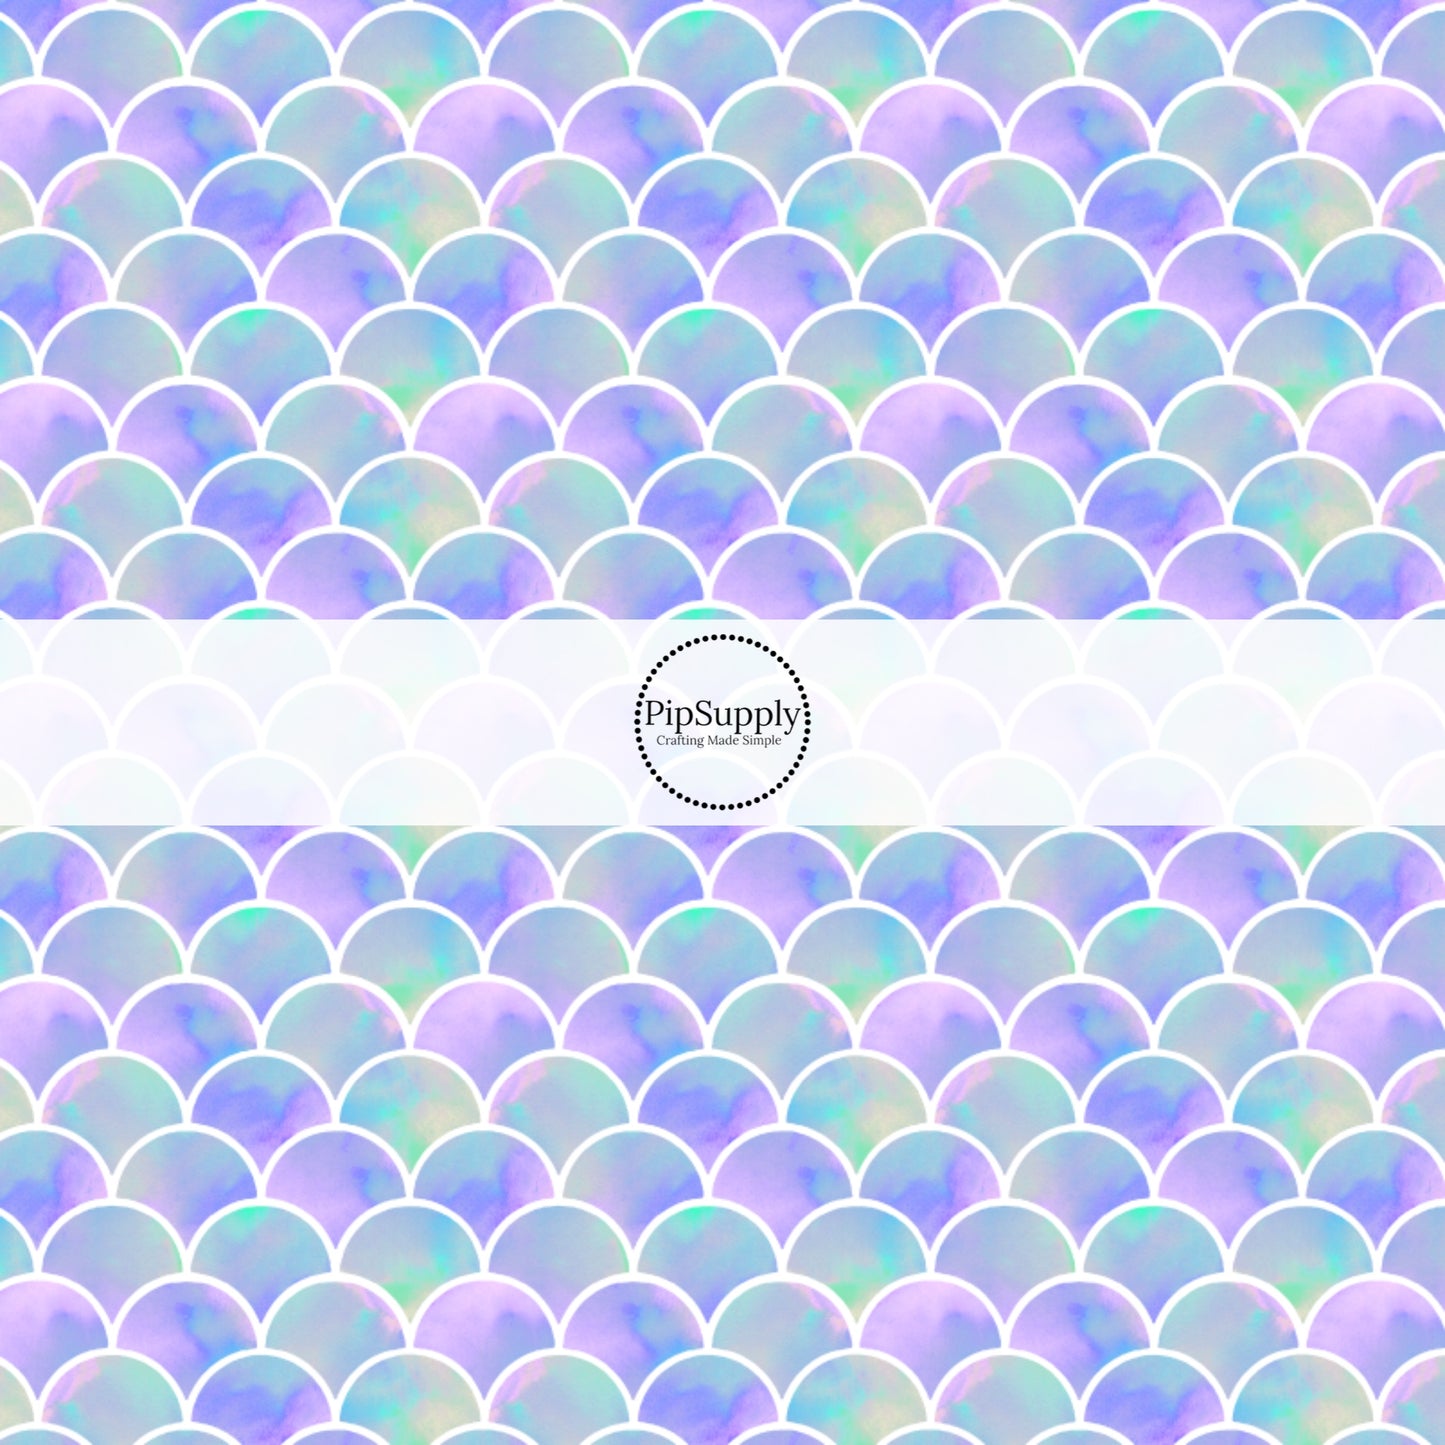 Purple and aqua ombre mermaid scales fabric by the yard.